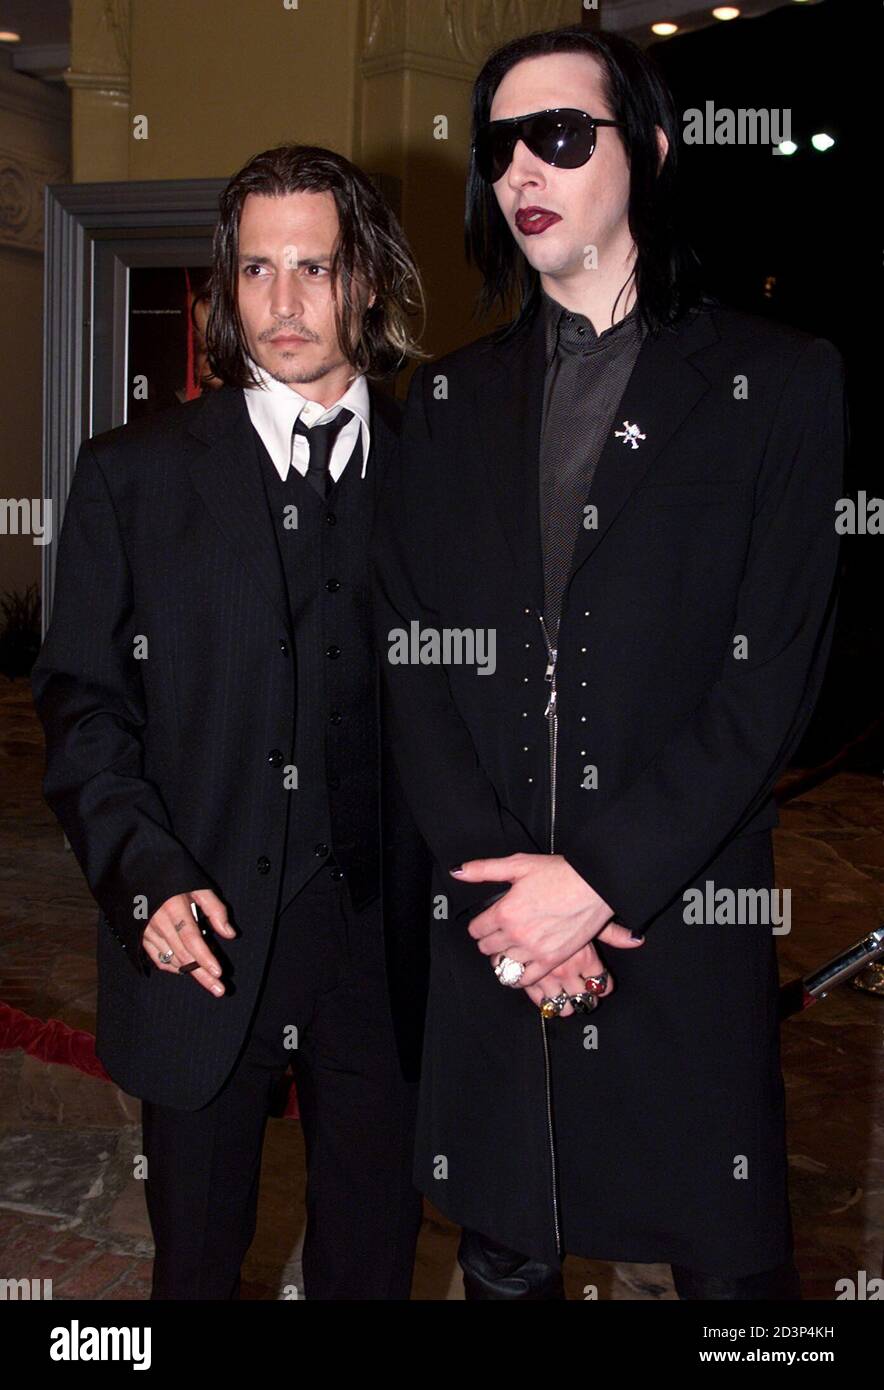 Actor Johnny Depp, star of the new film "From Hell" poses with singer  Marilyn Manson (R) at the film's premiere in Los Angeles October 17, 2001.  The film about the infamous killer